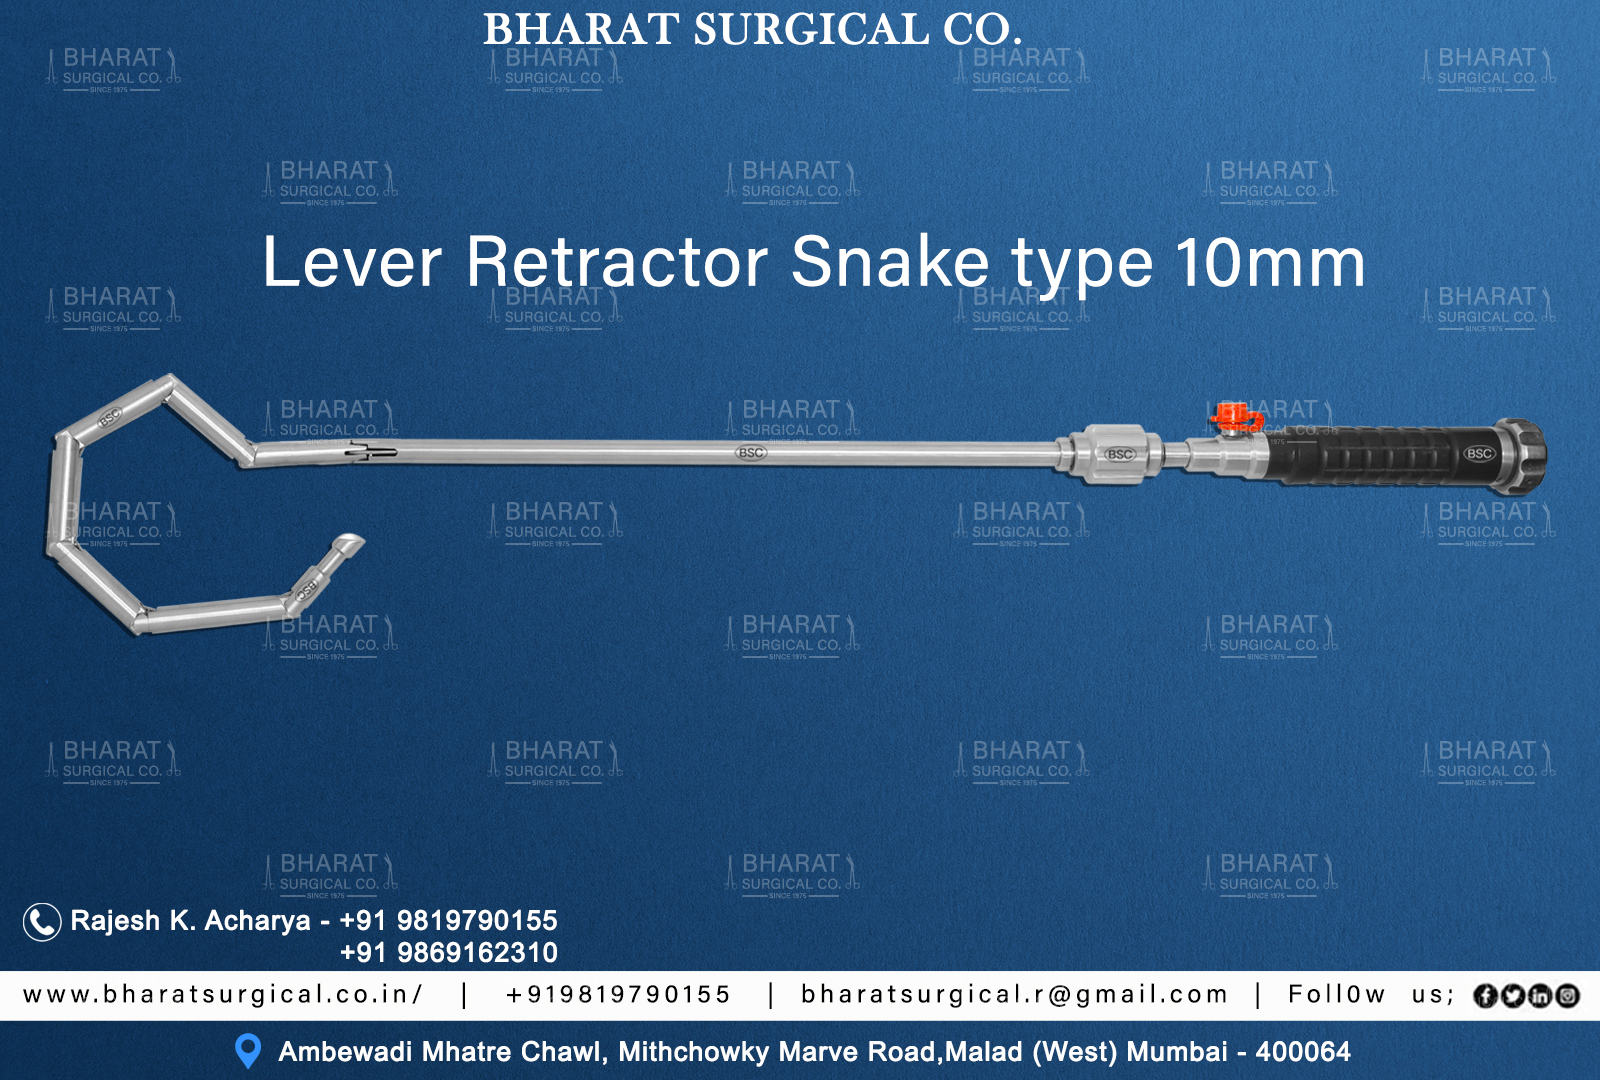 Snake Type Liver Retractor 10mm manufacturers Suppliers and exporters